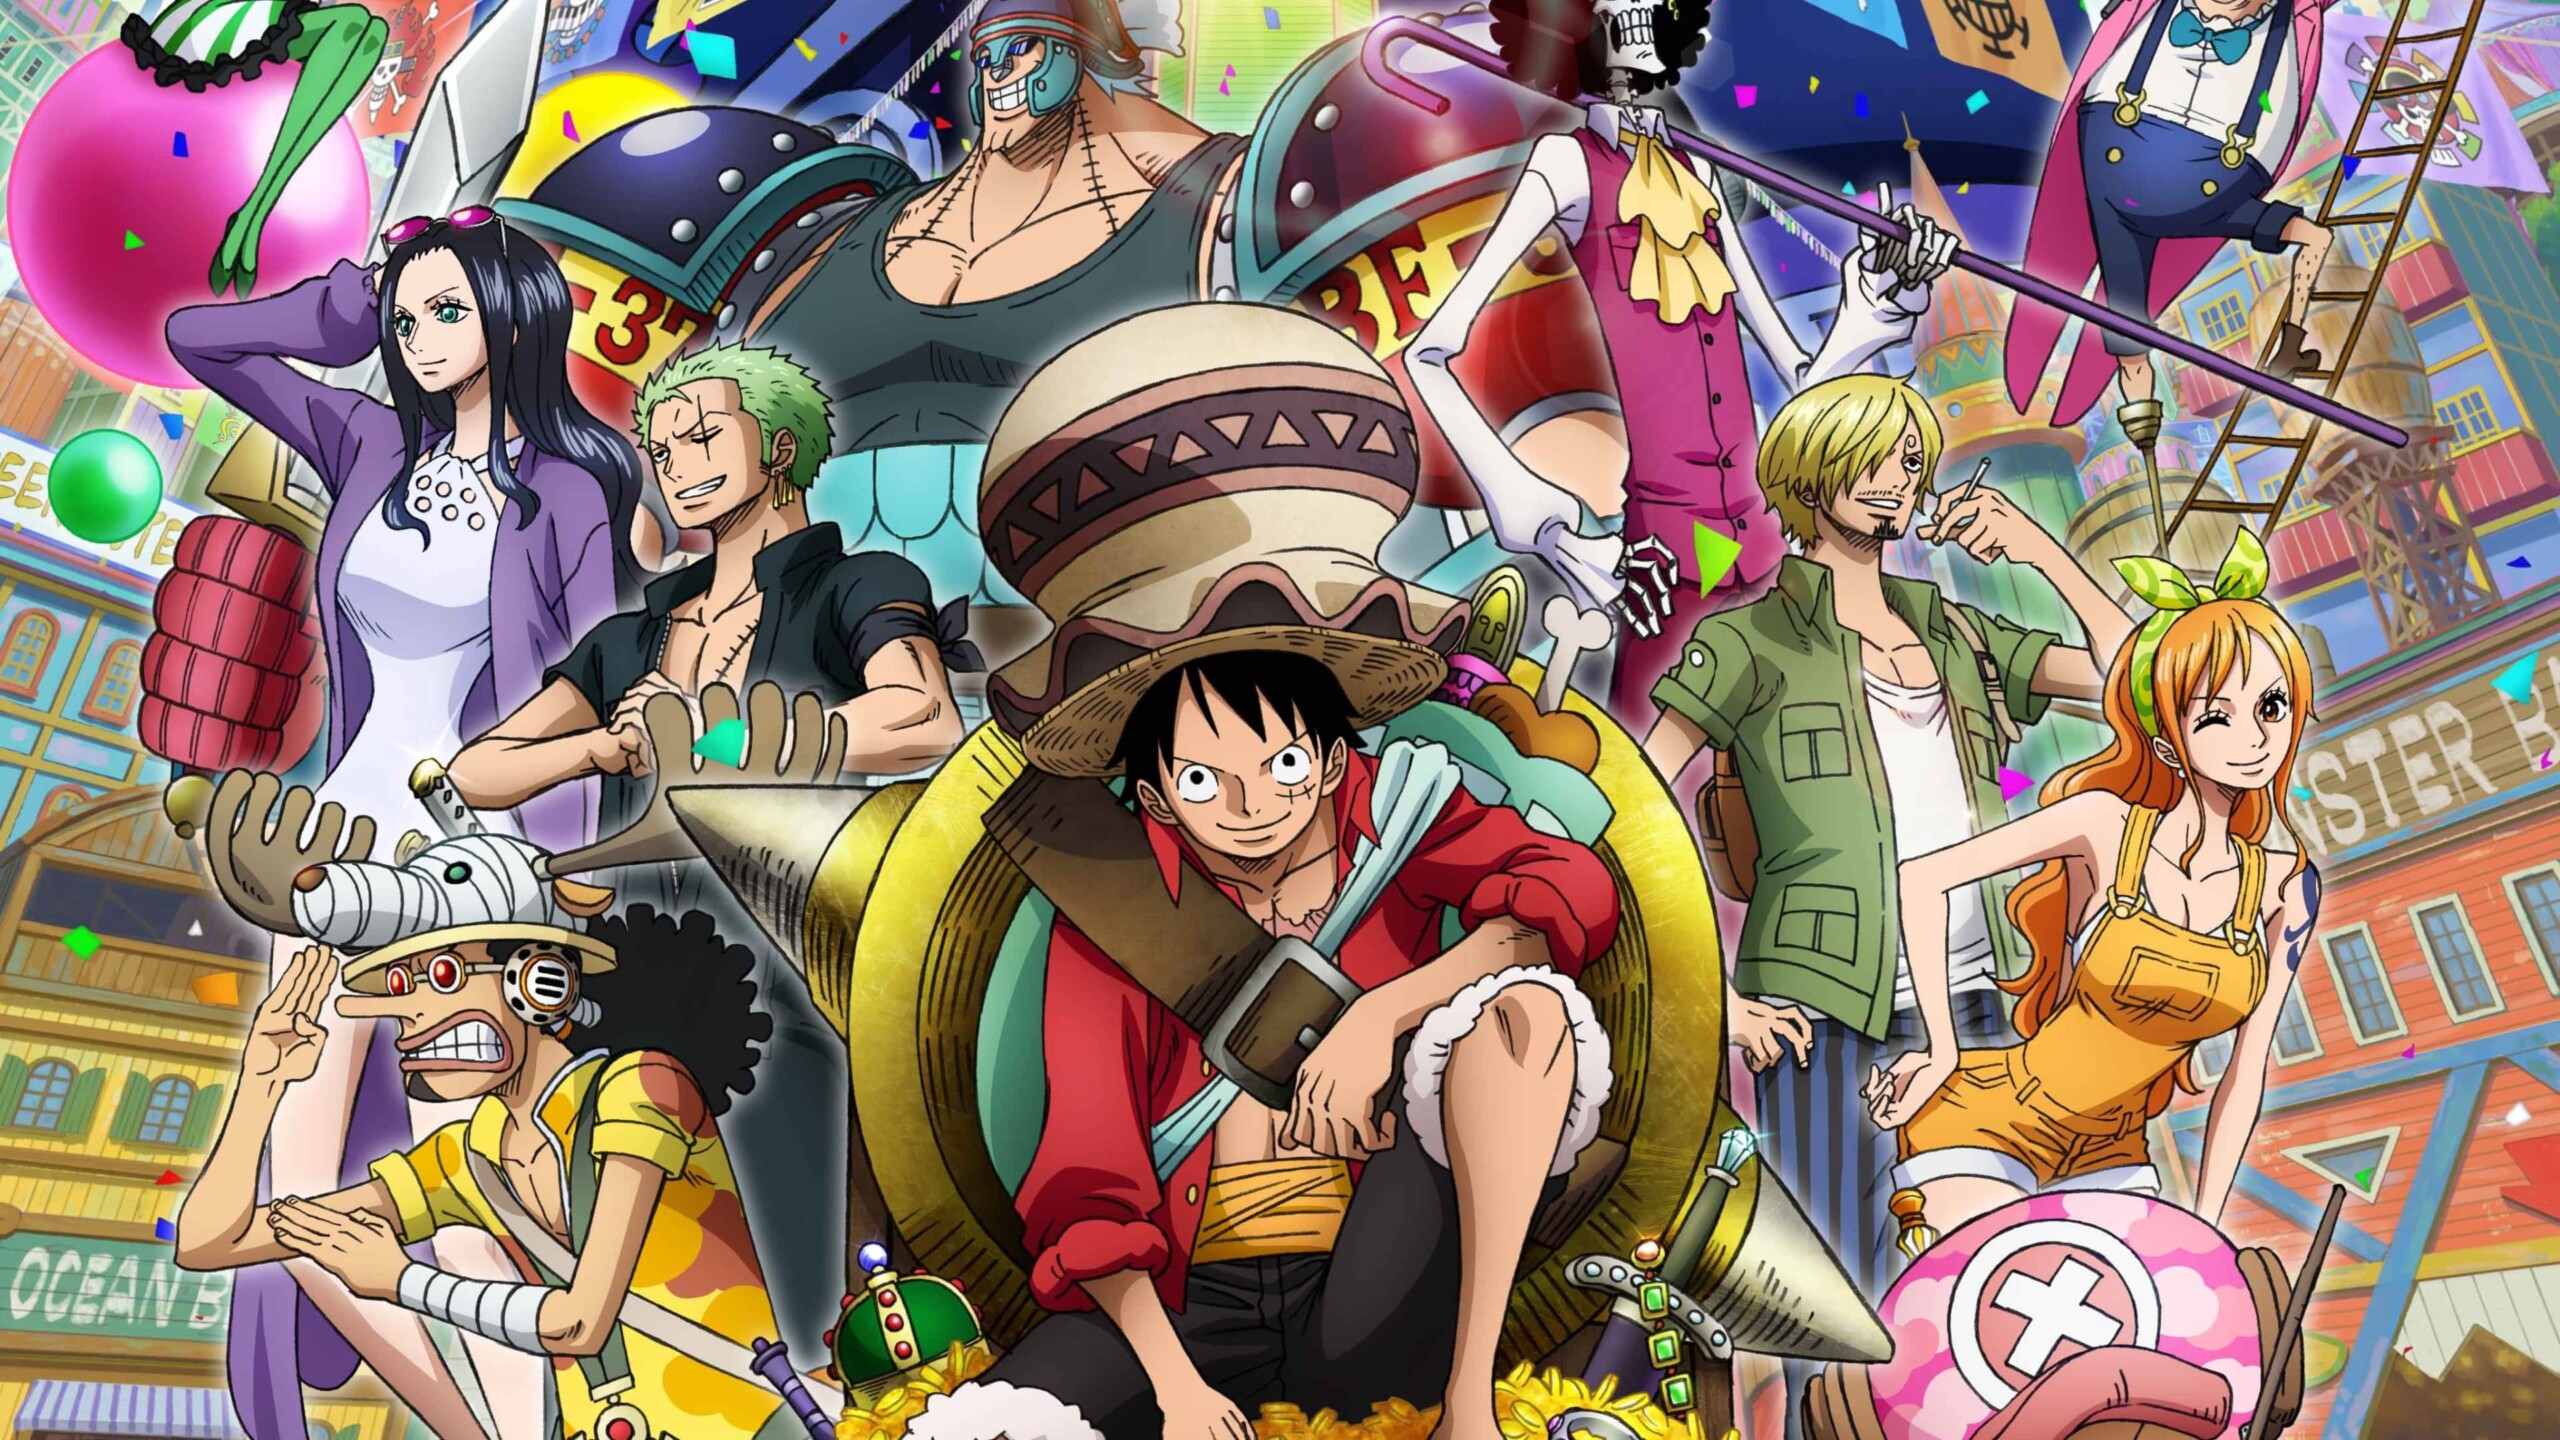 Anime One Piece 4k Ultra HD Wallpaper by RoninGFX